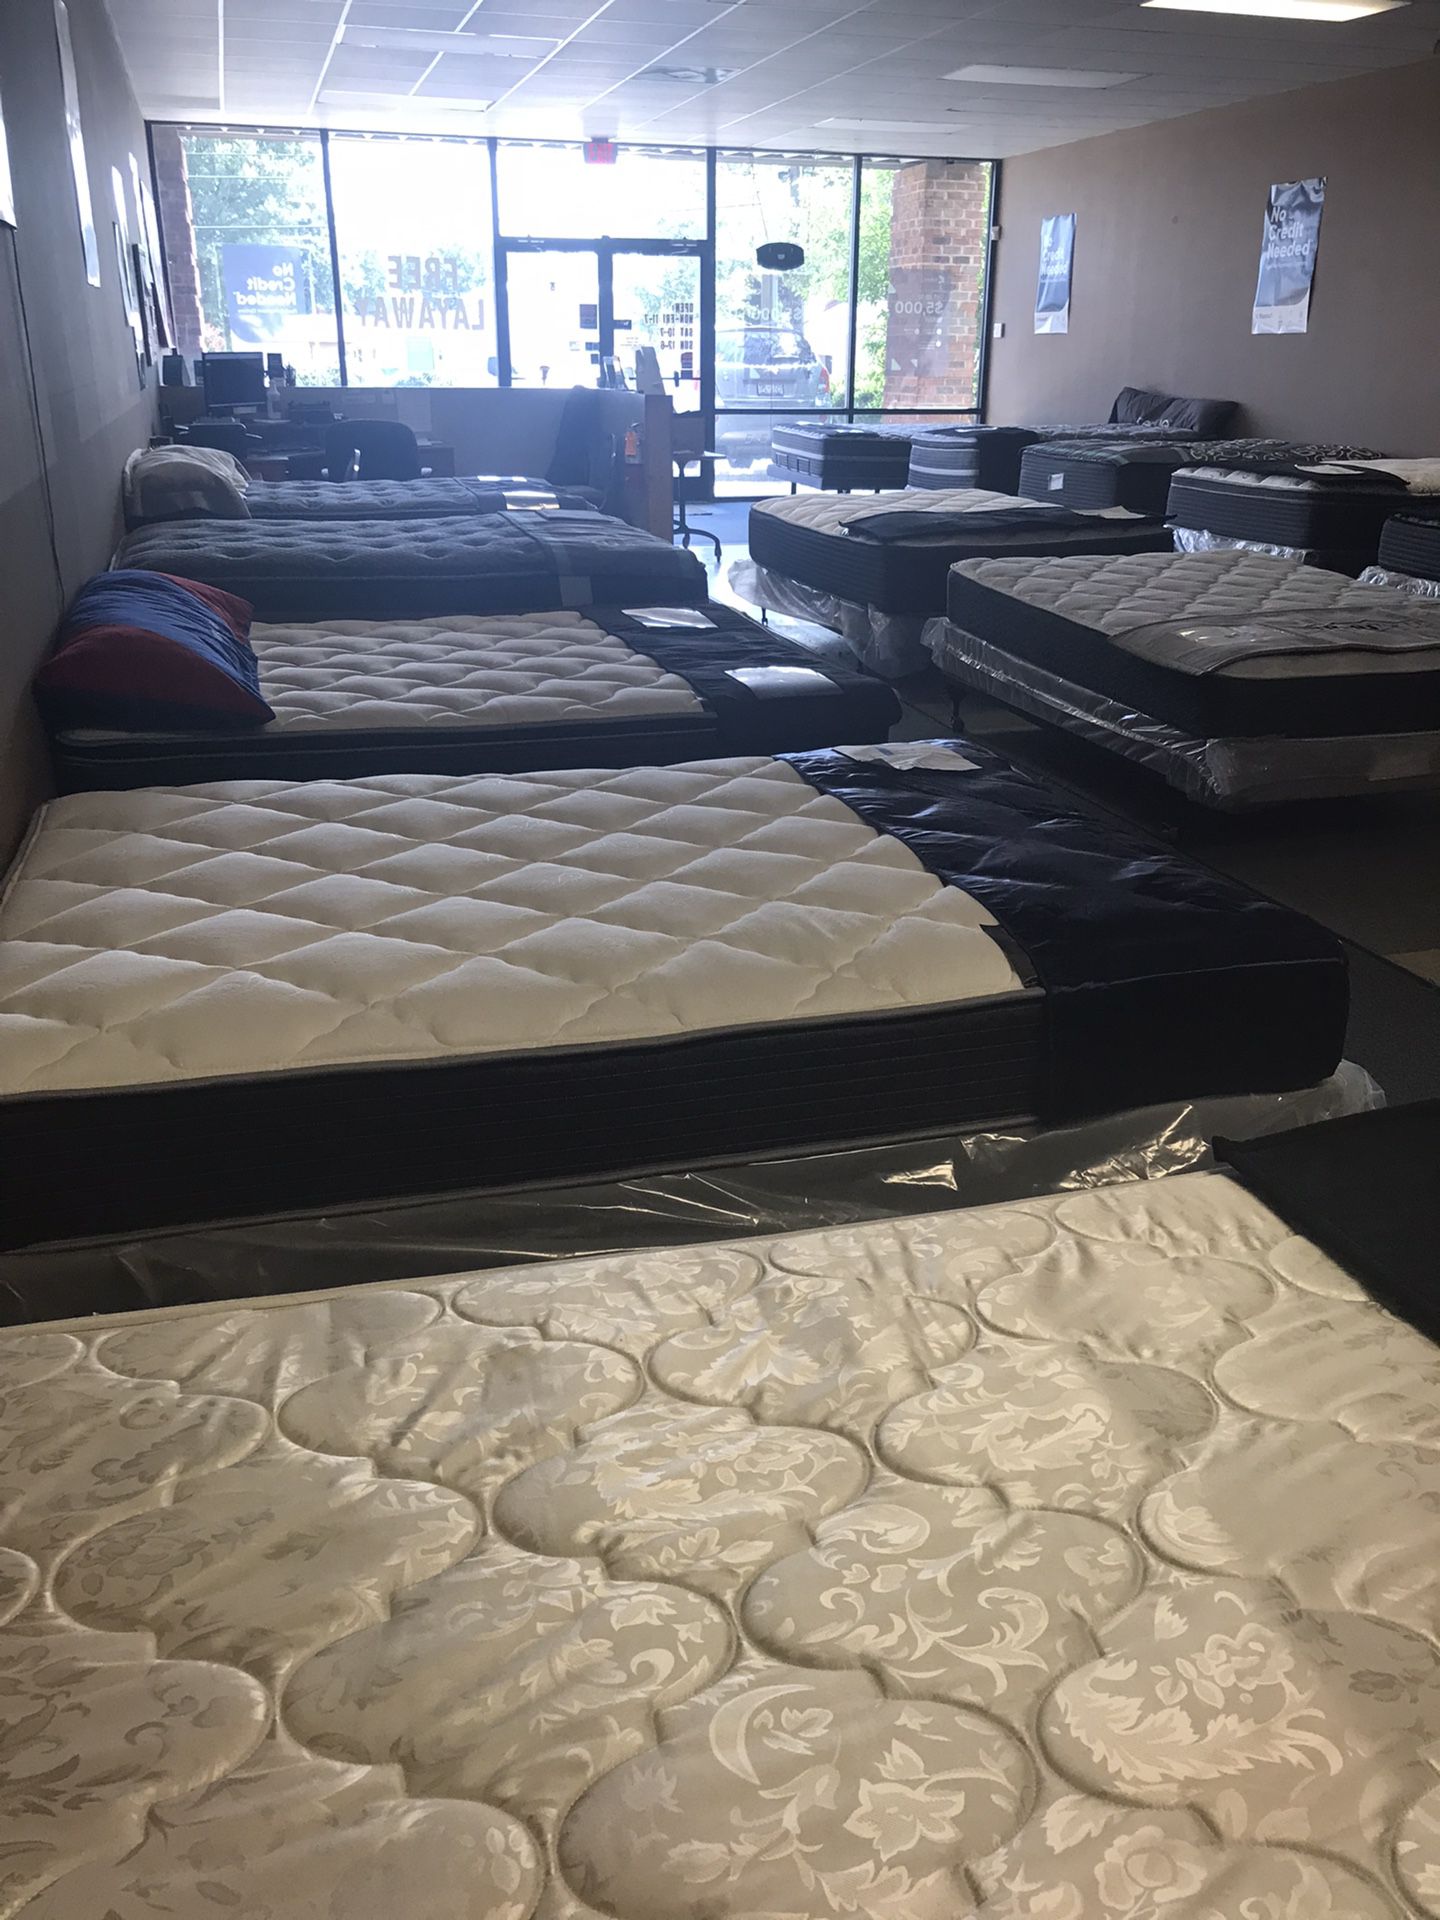 👑Brand New King Mattresses Starting At $179 (all sizes available)👑